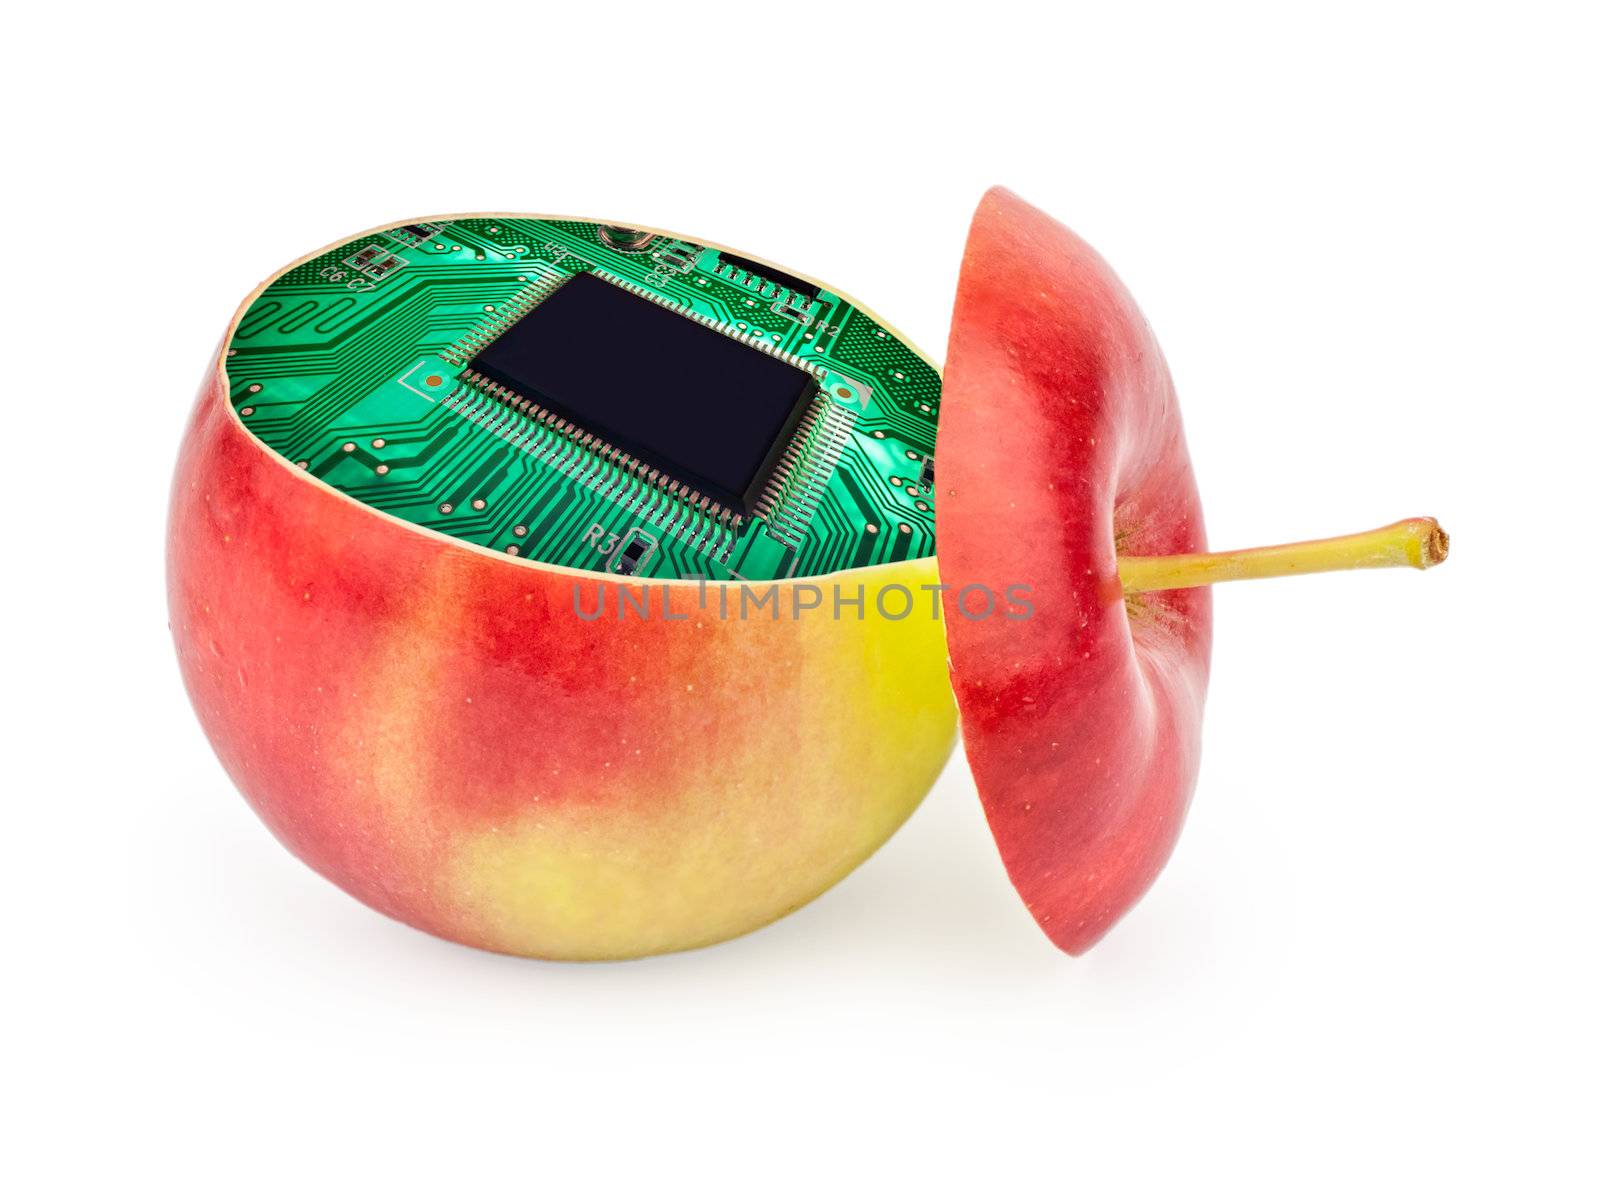 cut apple inside with electronic circuit by Zhukow